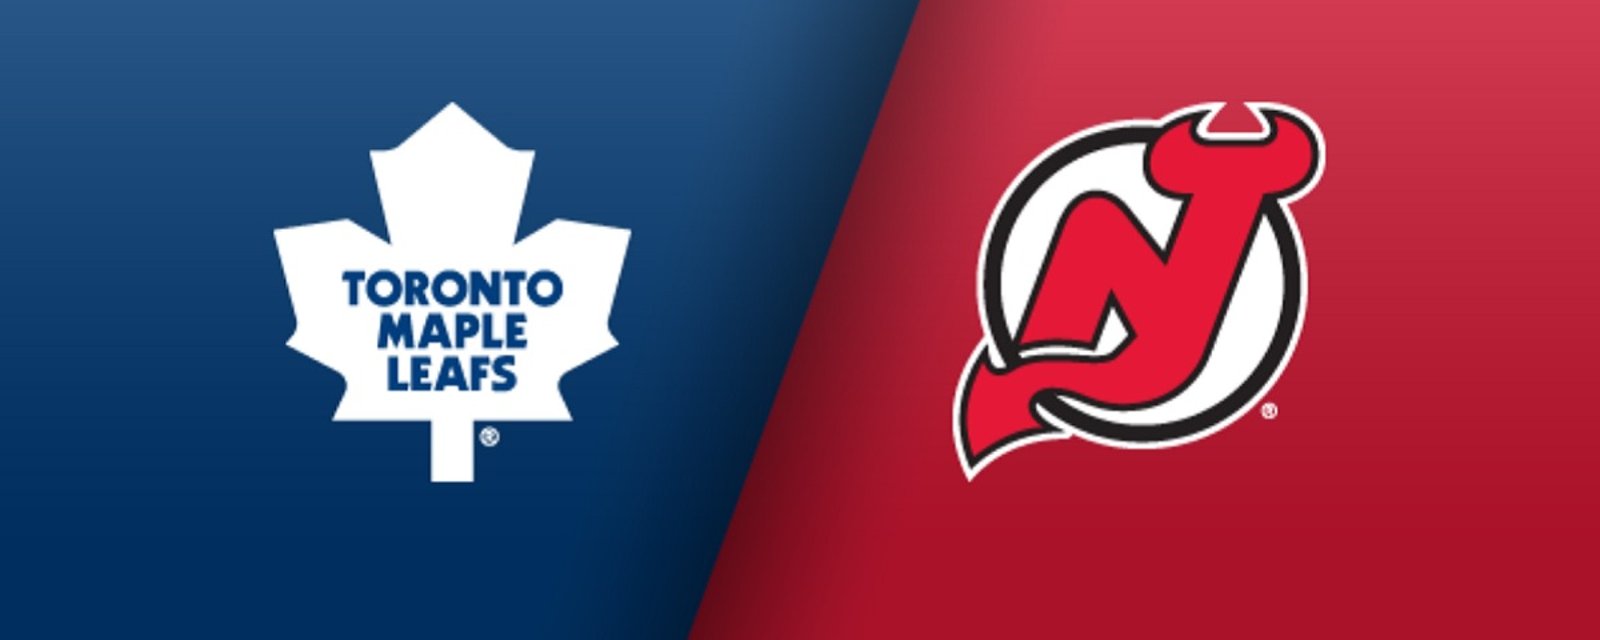 Devils pair up their two young stars ahead of match up against Toronto.